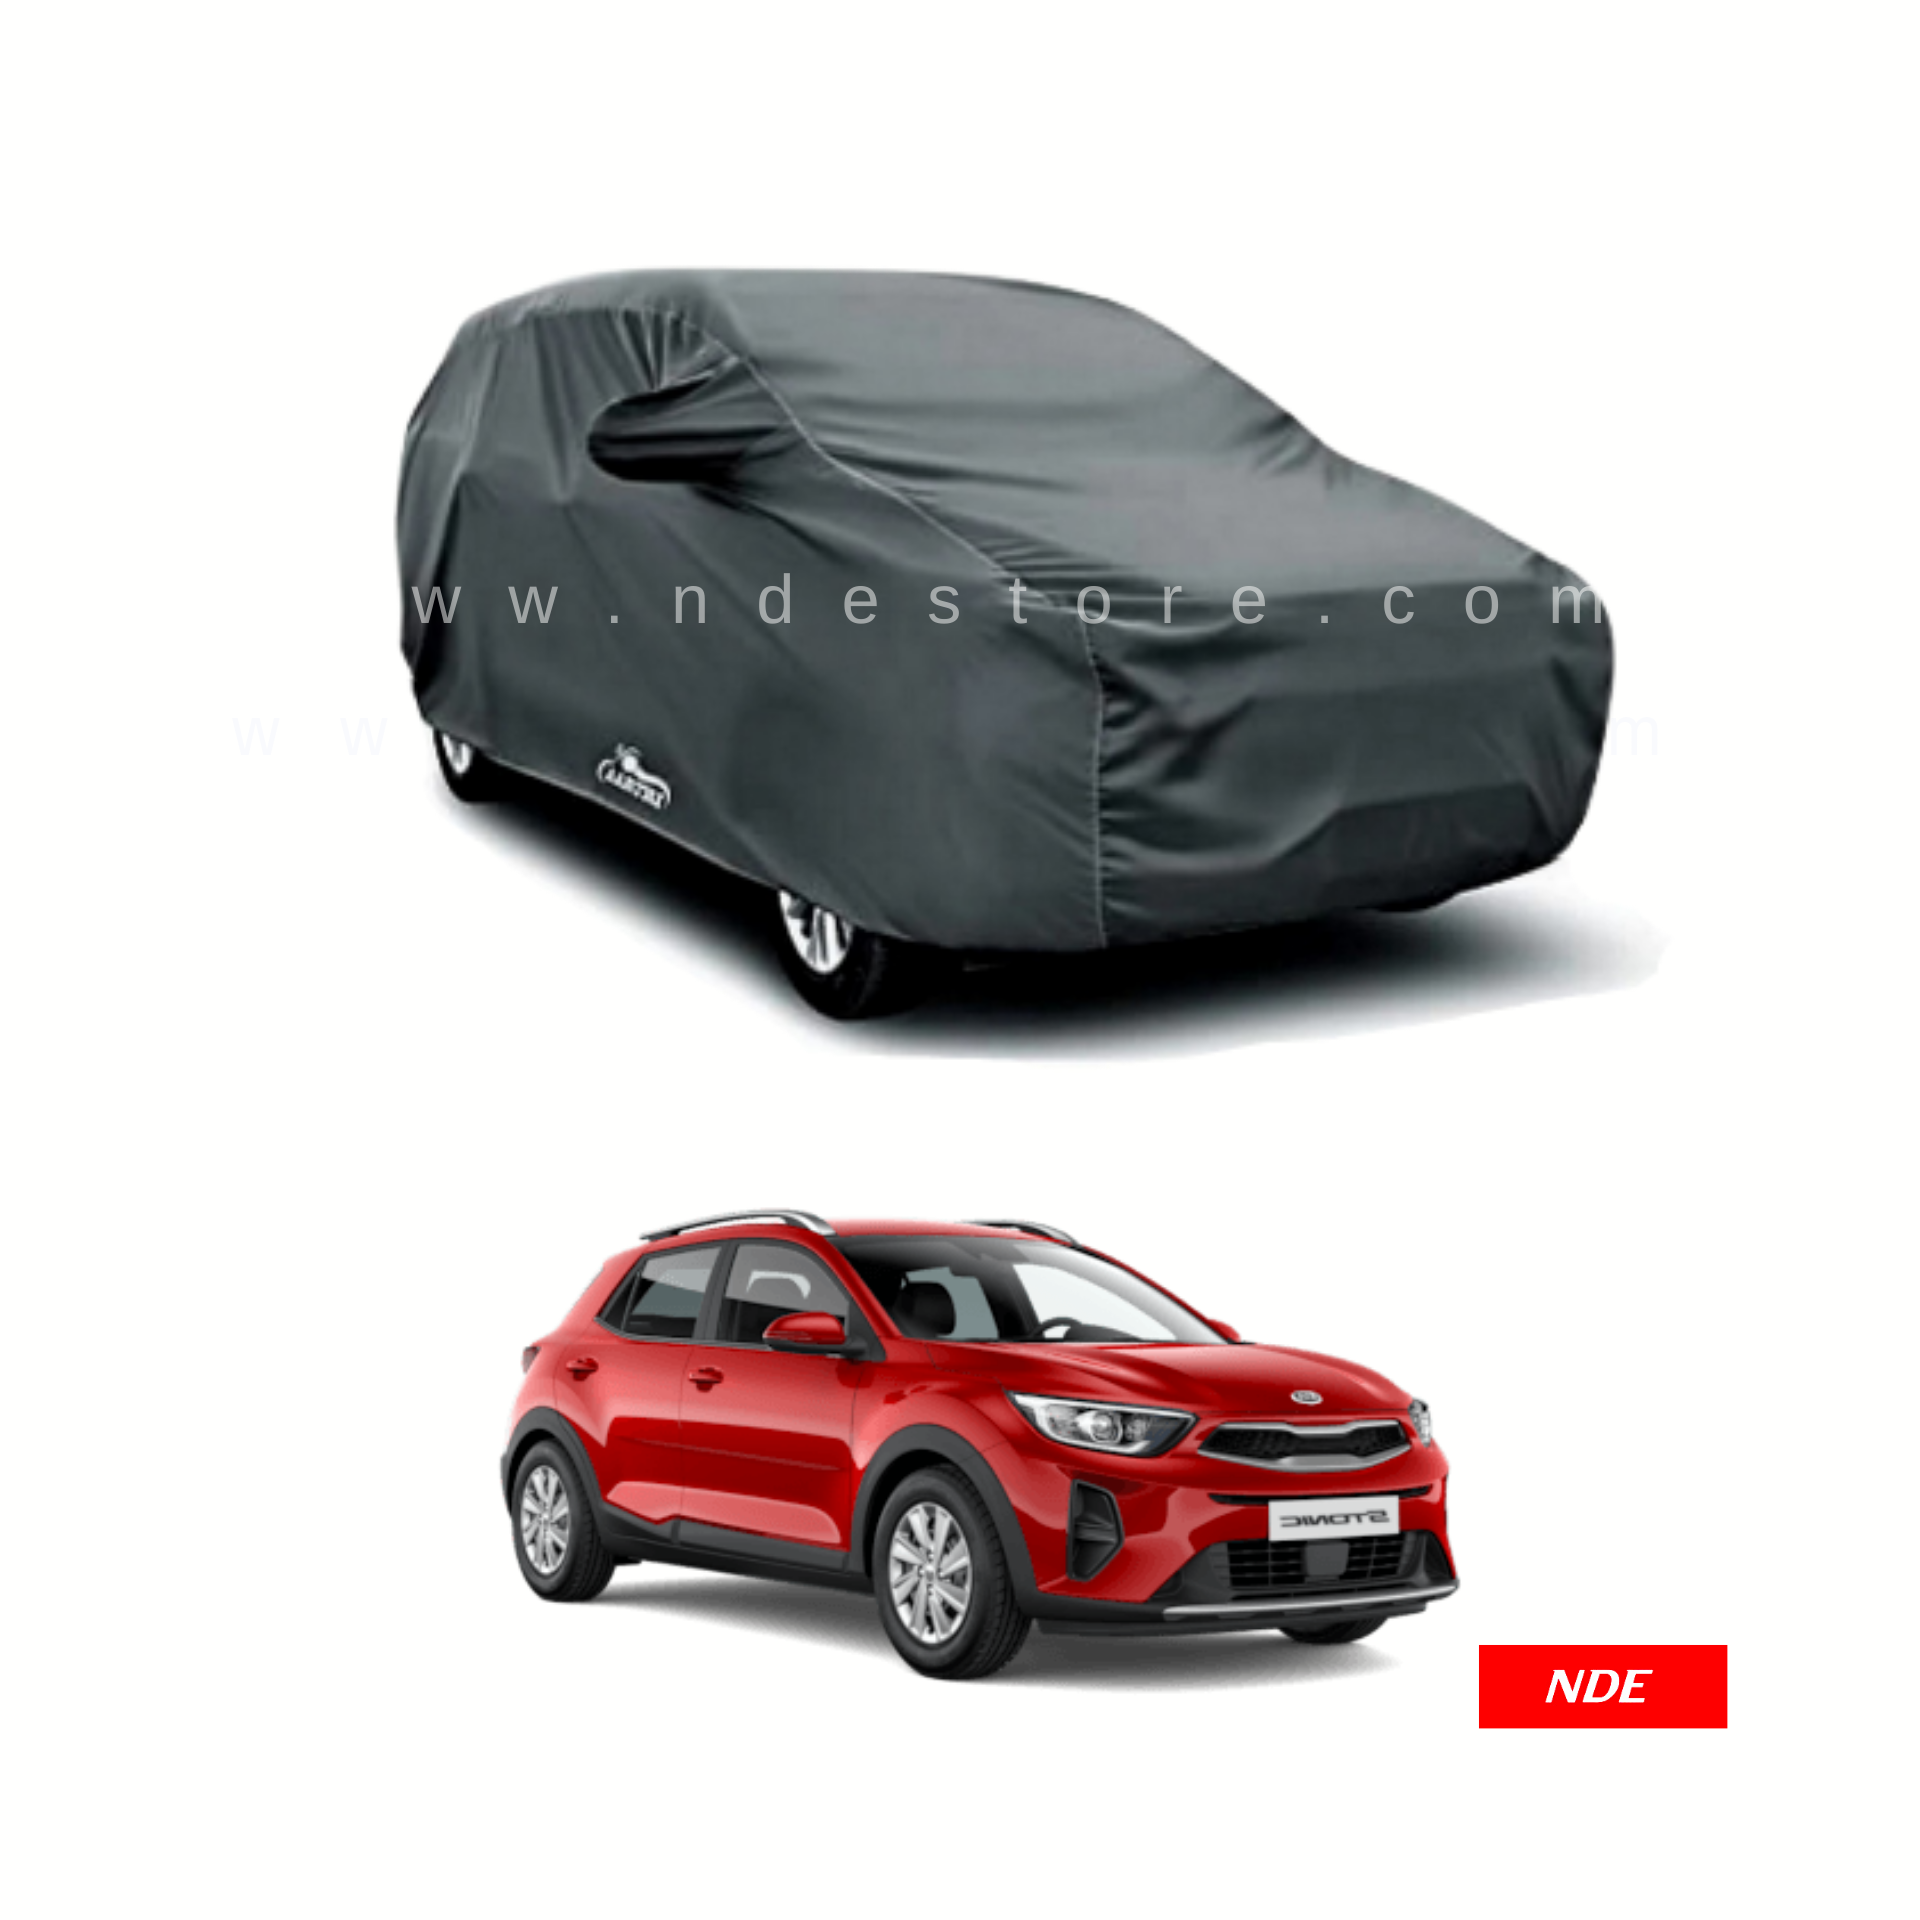 Kia Stonic Double Coated Silver Top Cover Silver Full Car Cover